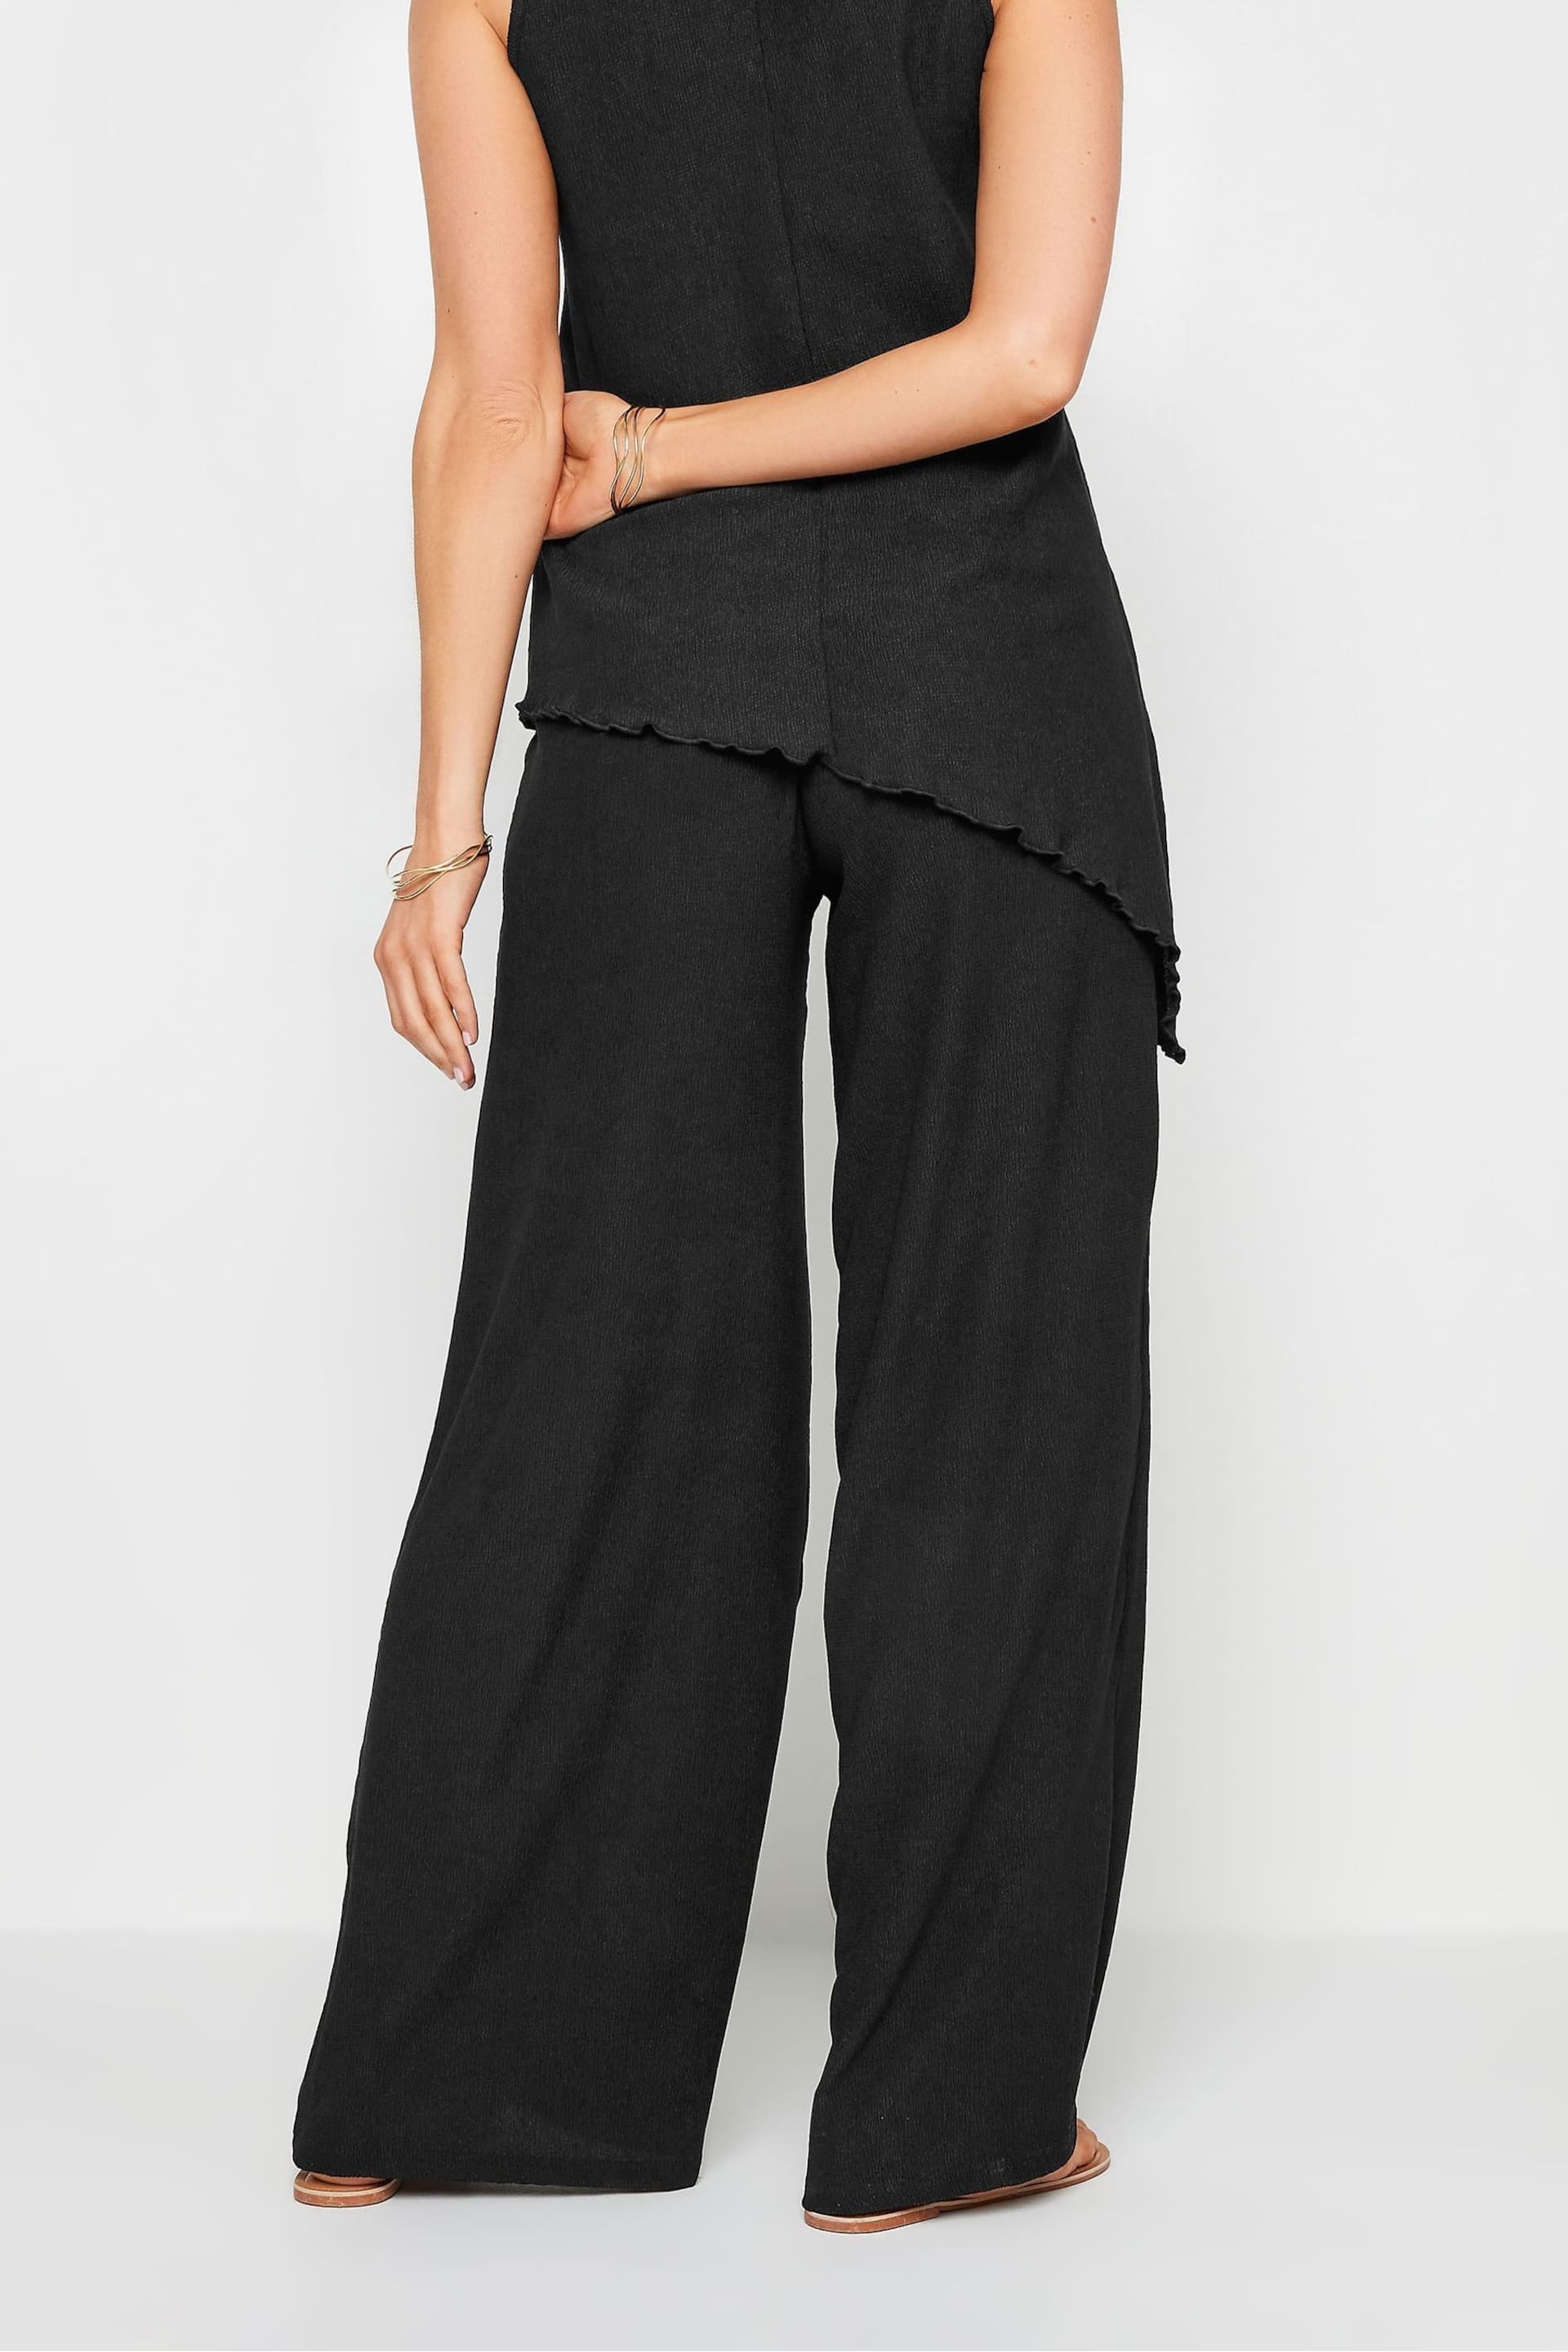 Long Tall Sally Blue Long Tall Sally Textured Wide Leg Trousers - Image 3 of 4